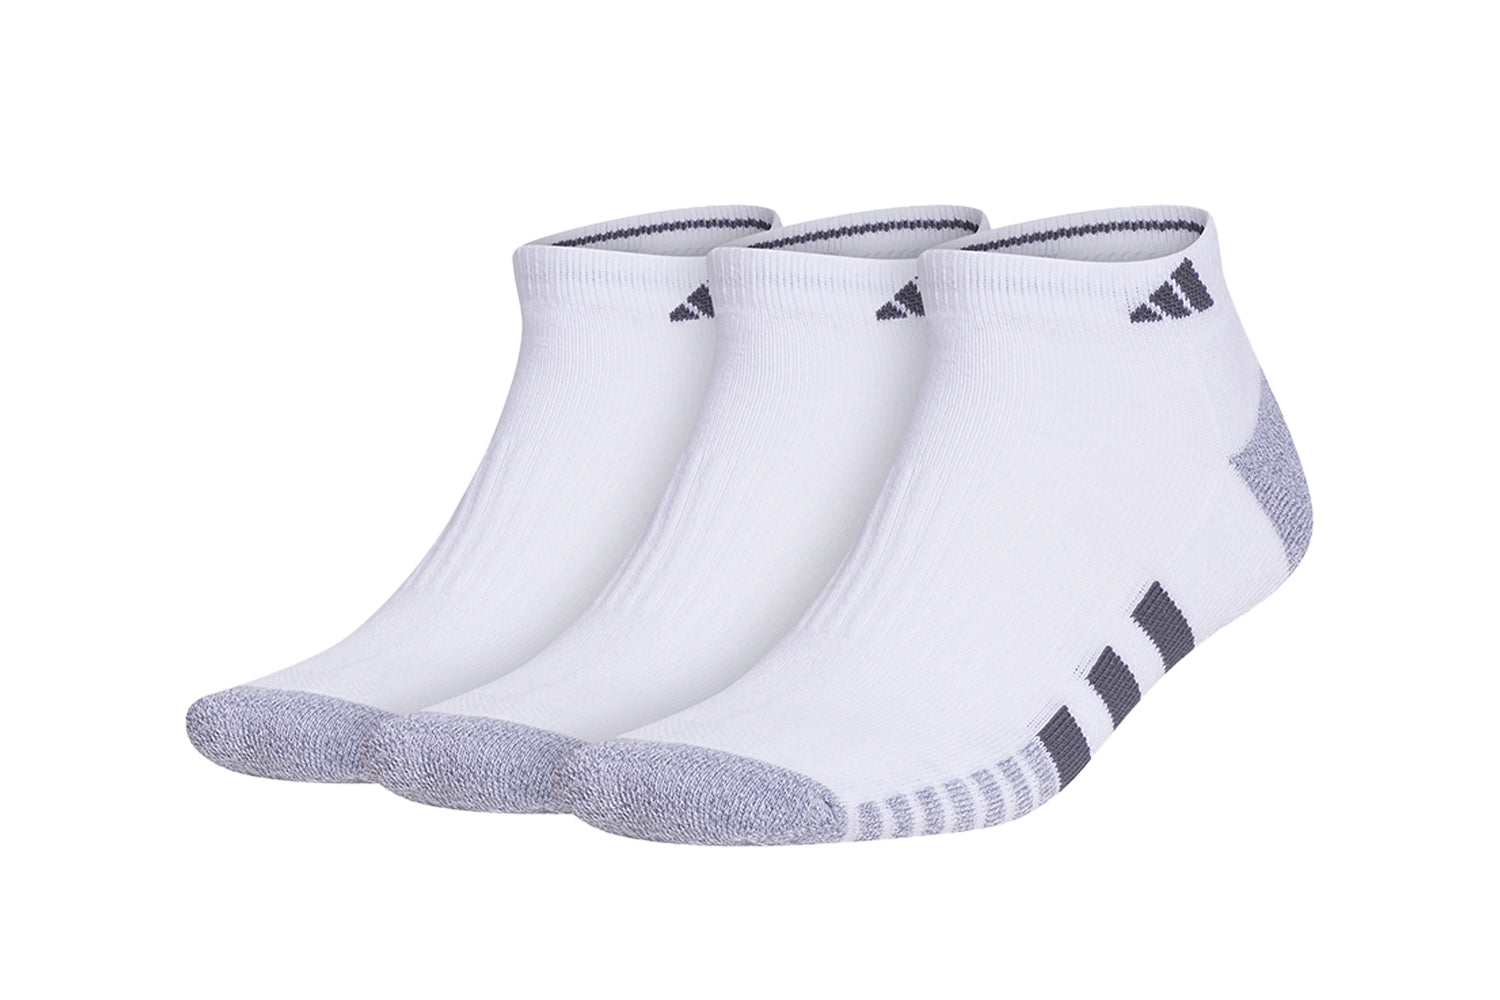 CHAUSSETTES BASSES AMORTIES 3 PAIRES